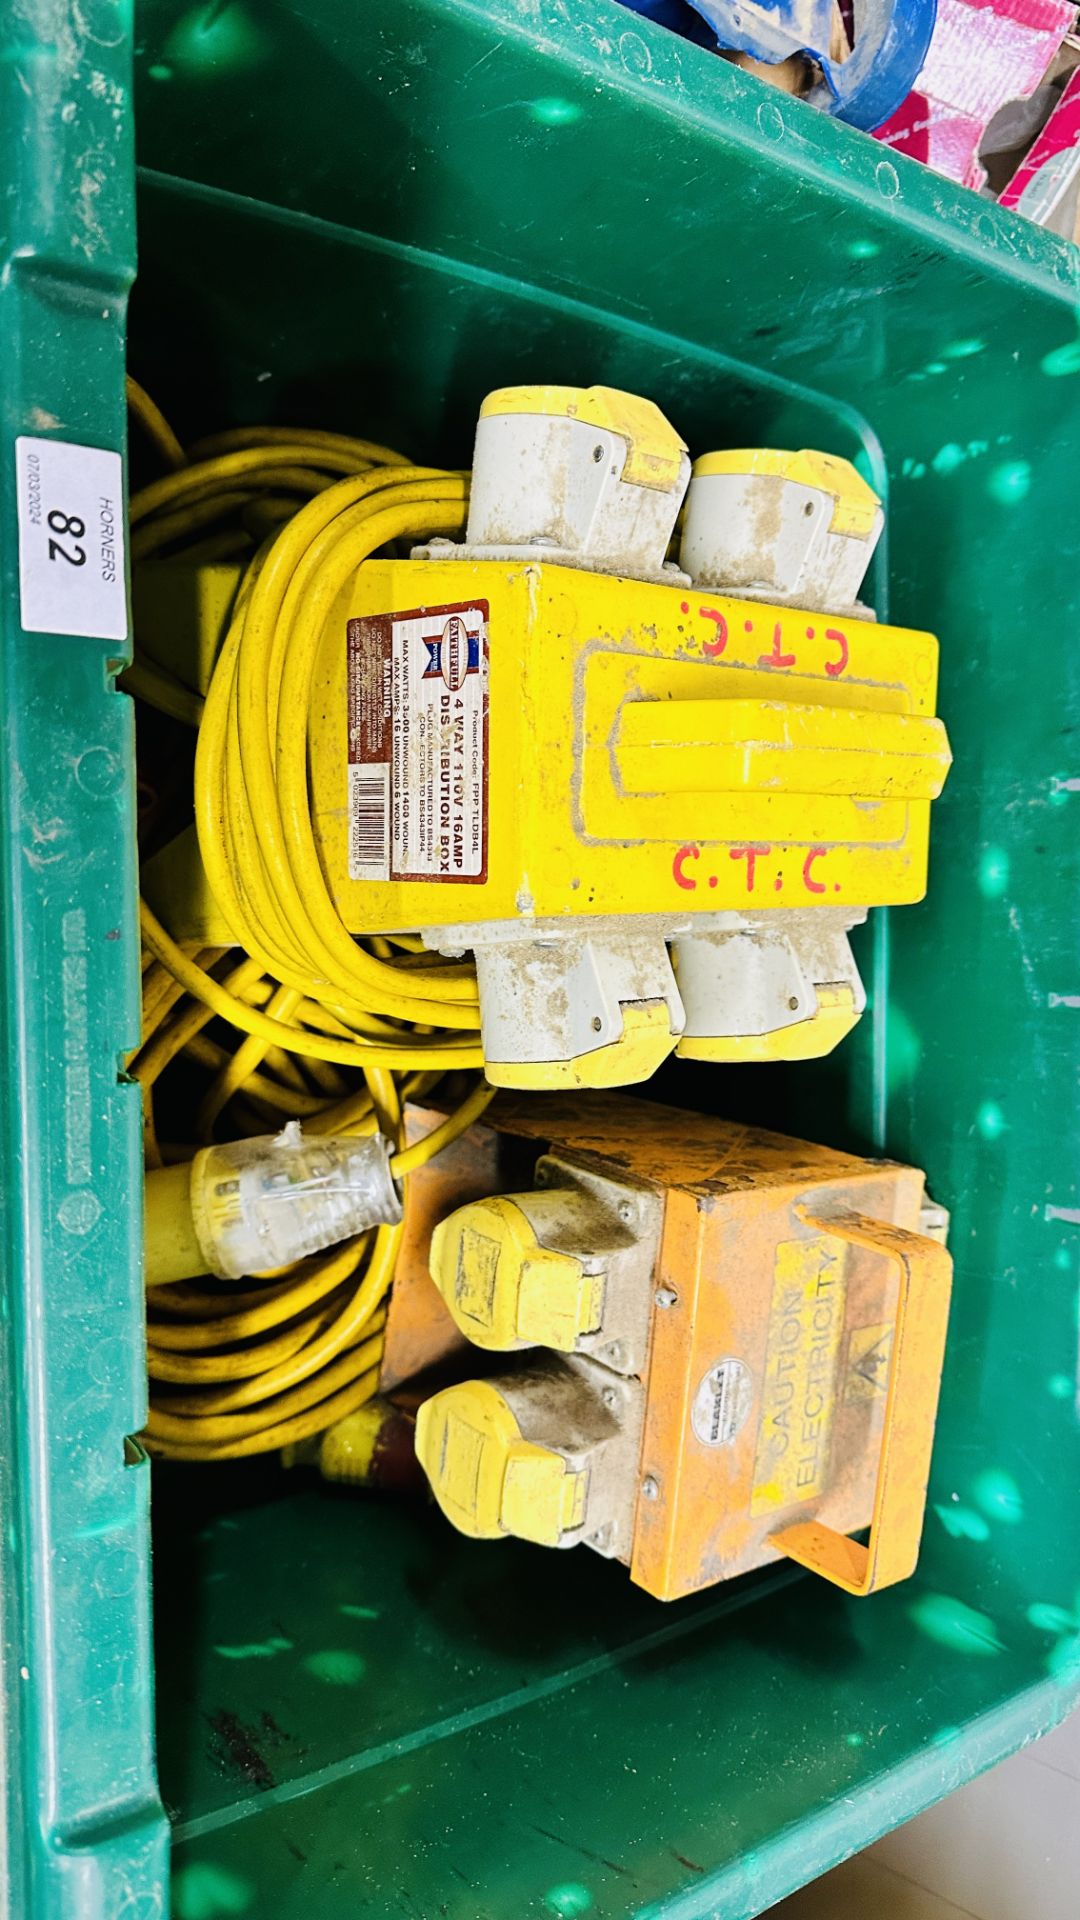 3 X 110 VOLT POWER TRANSFORMERS PLUS 2 JUNCTION BOXES & ASSORTED CABLES - TRADE ONLY. - Image 5 of 5